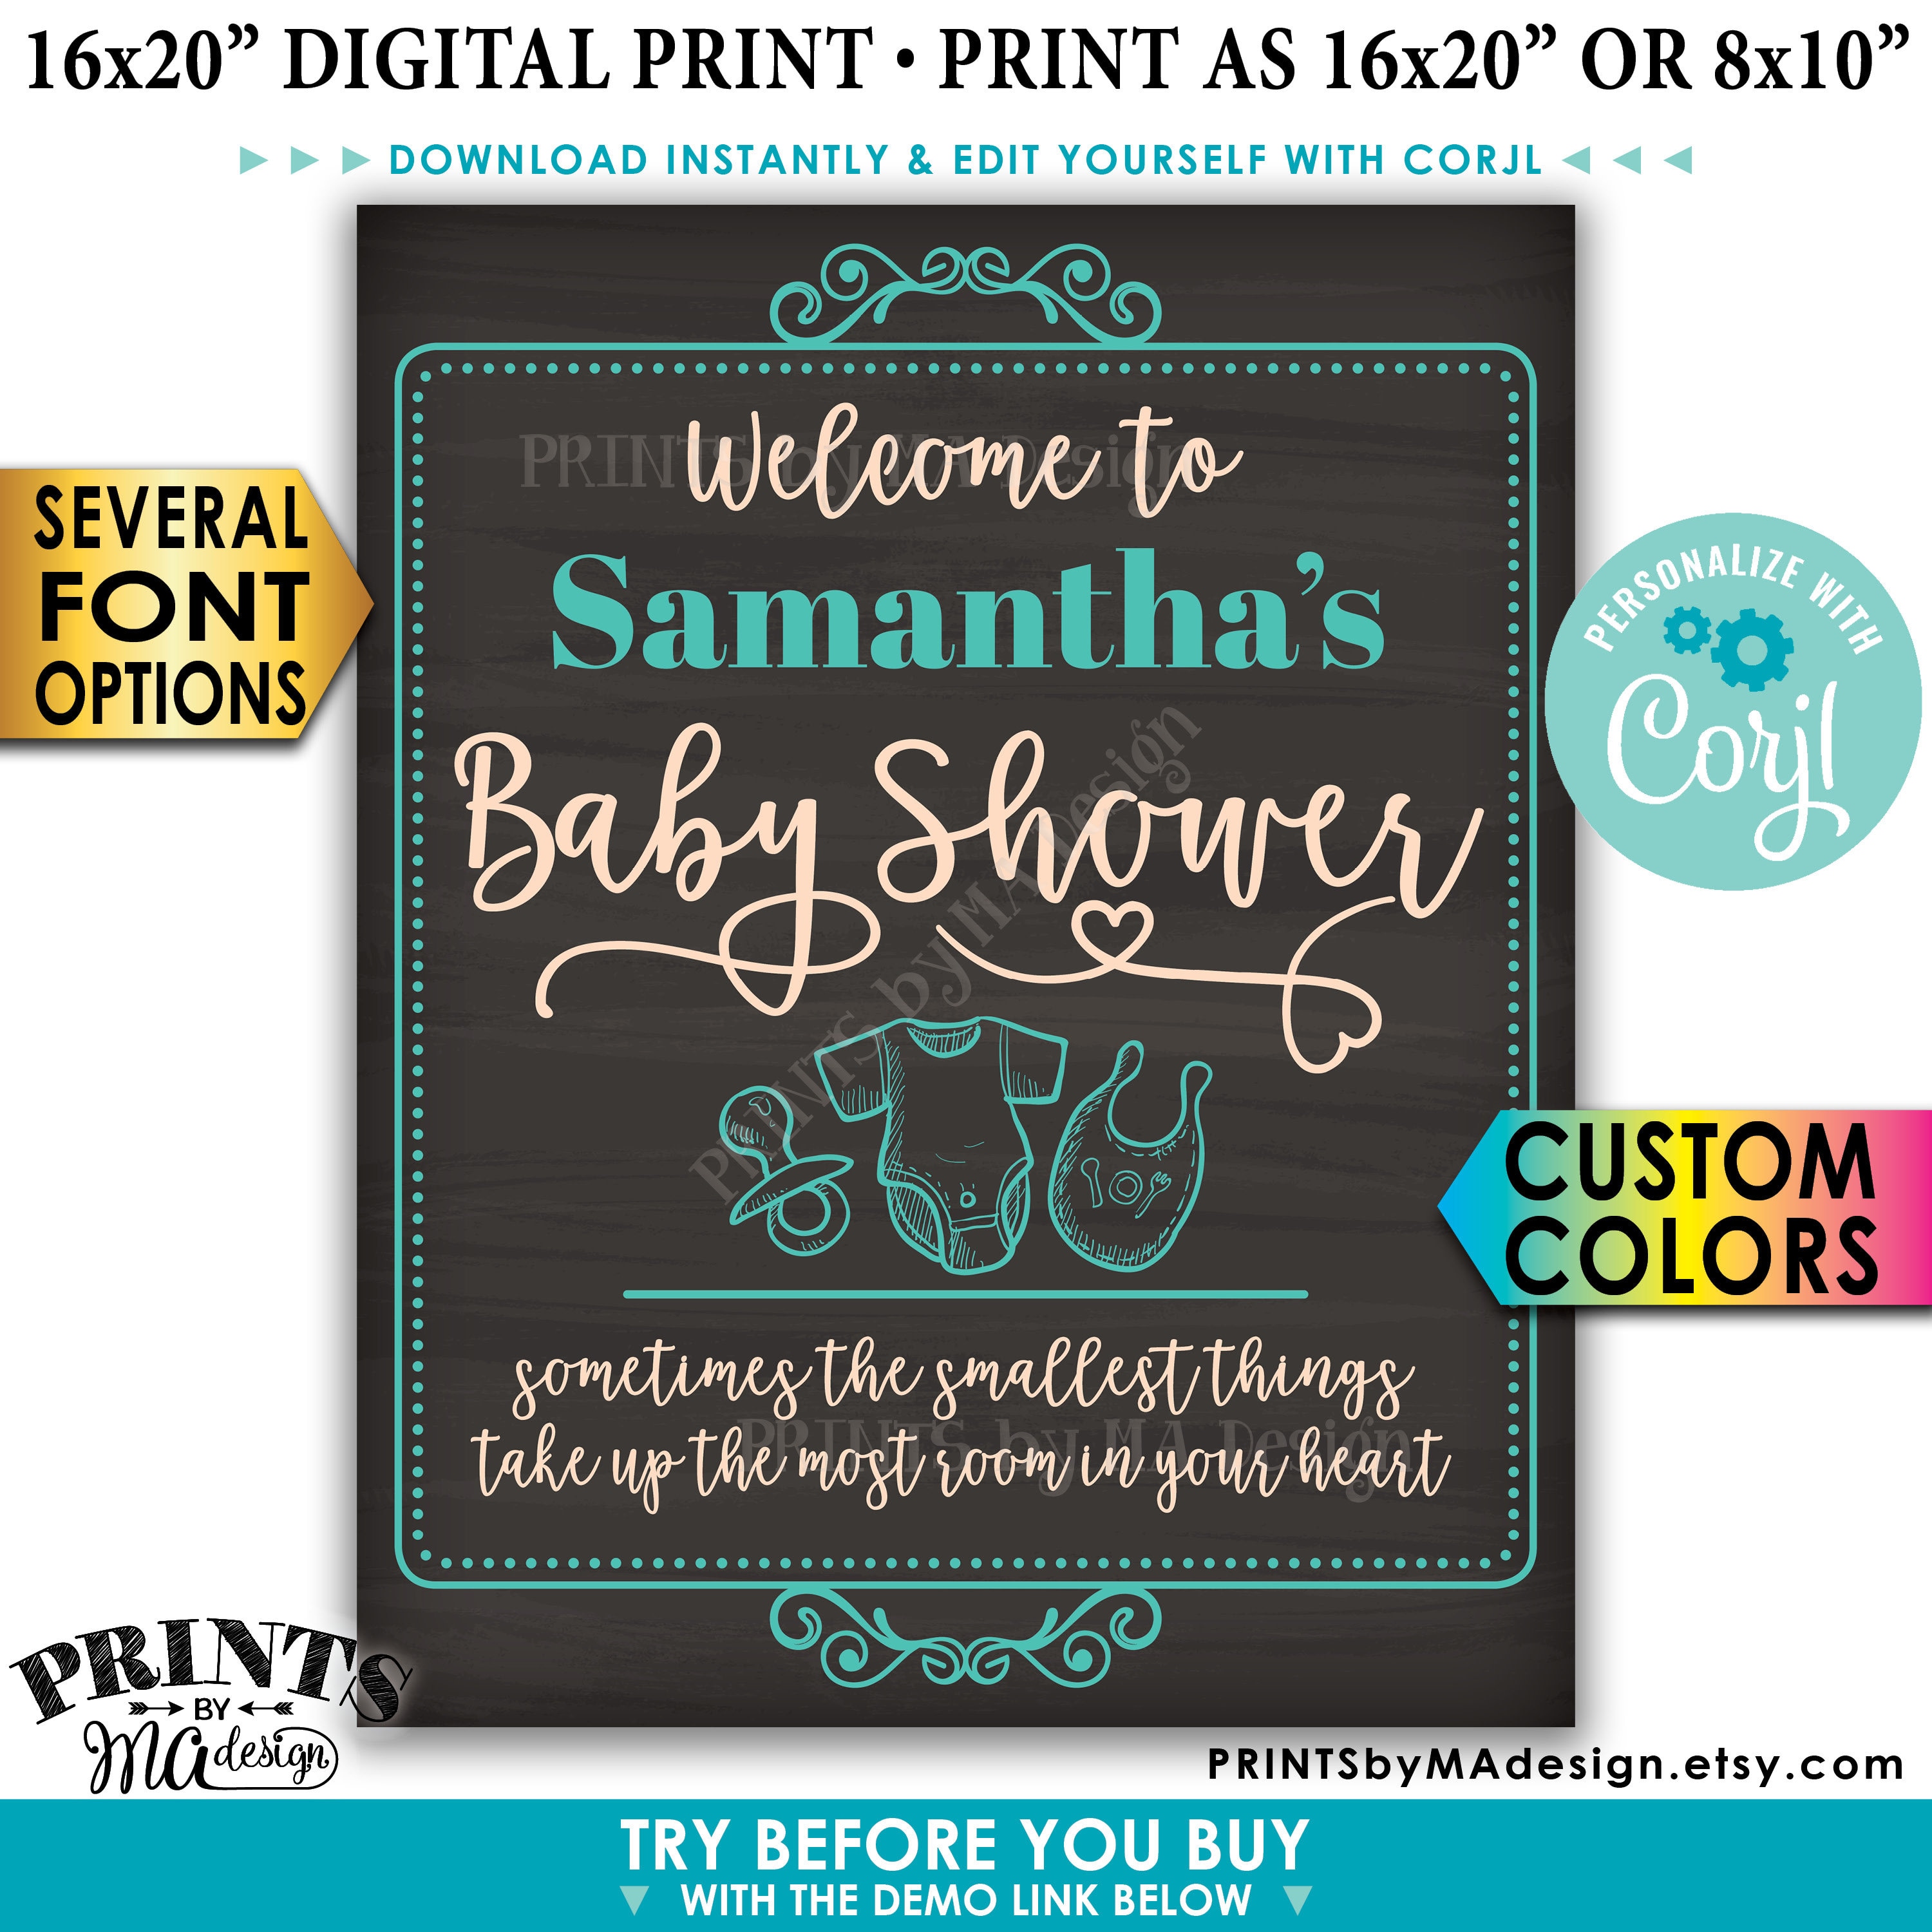 baby-shower-welcome-sign-custom-printable-8x10-16x20-chalkboard-style